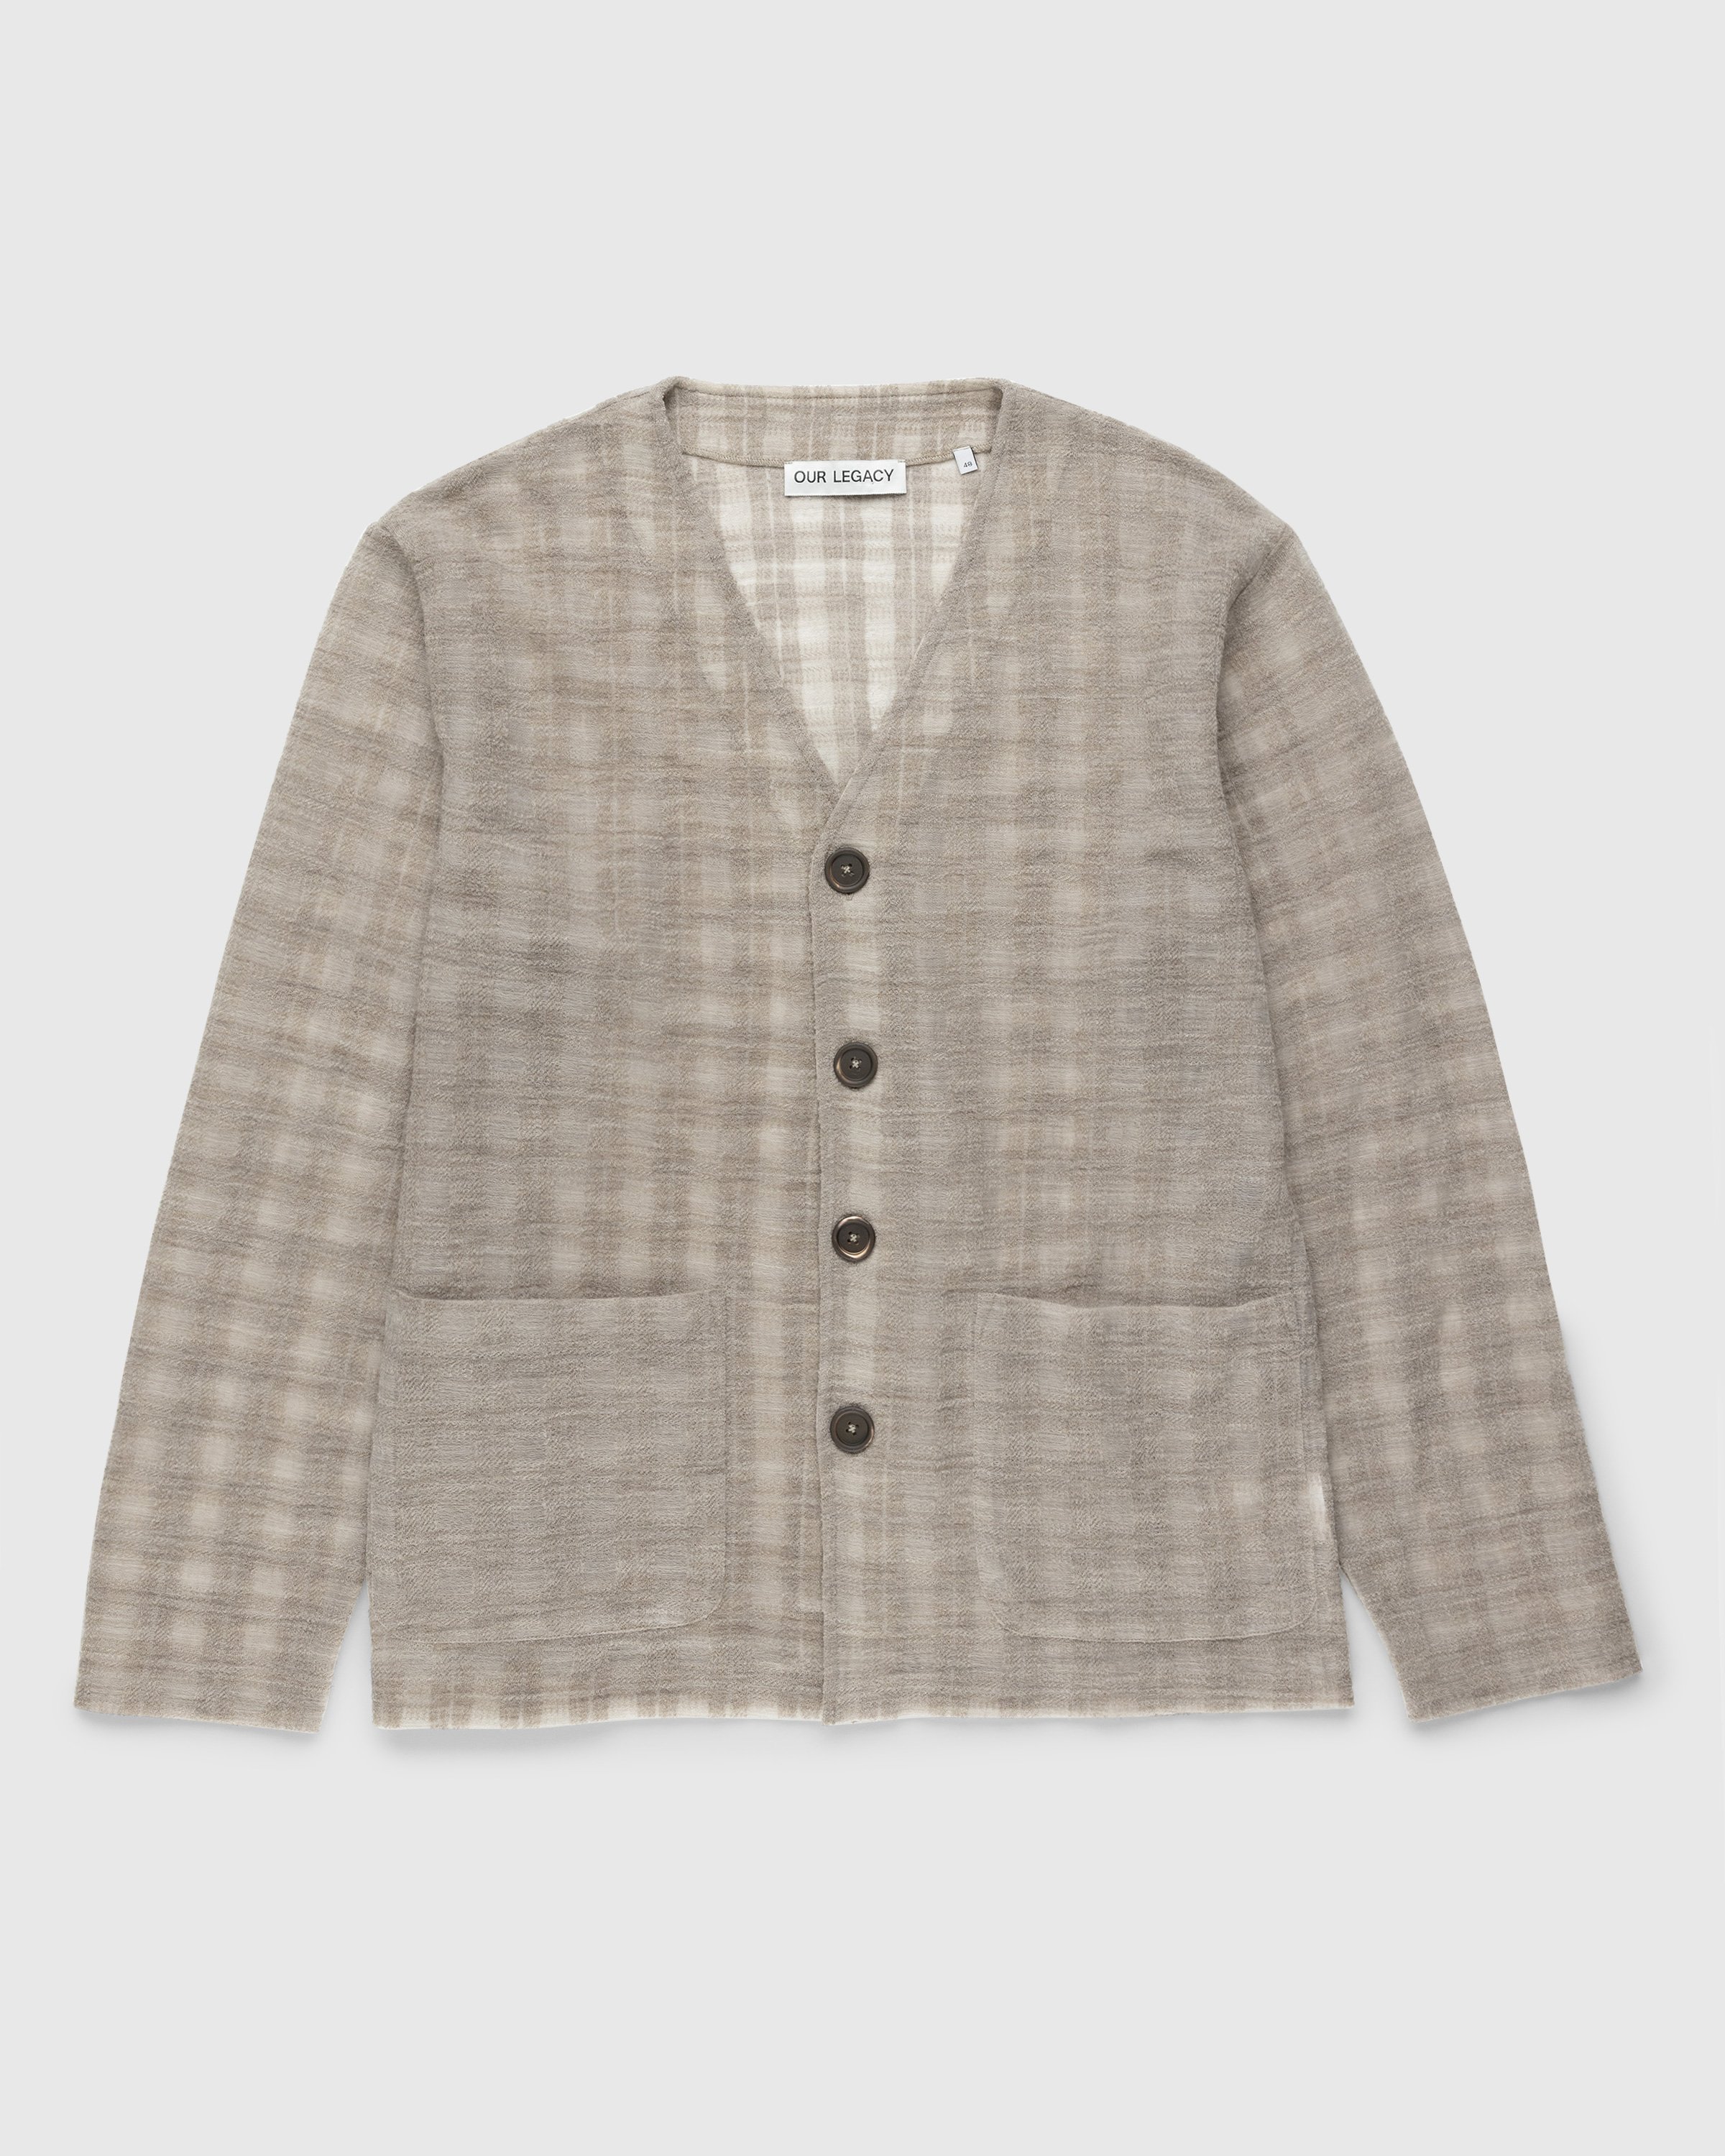 Our Legacy - Cardigan Grey Disintegration Check - Clothing - Grey - Image 1